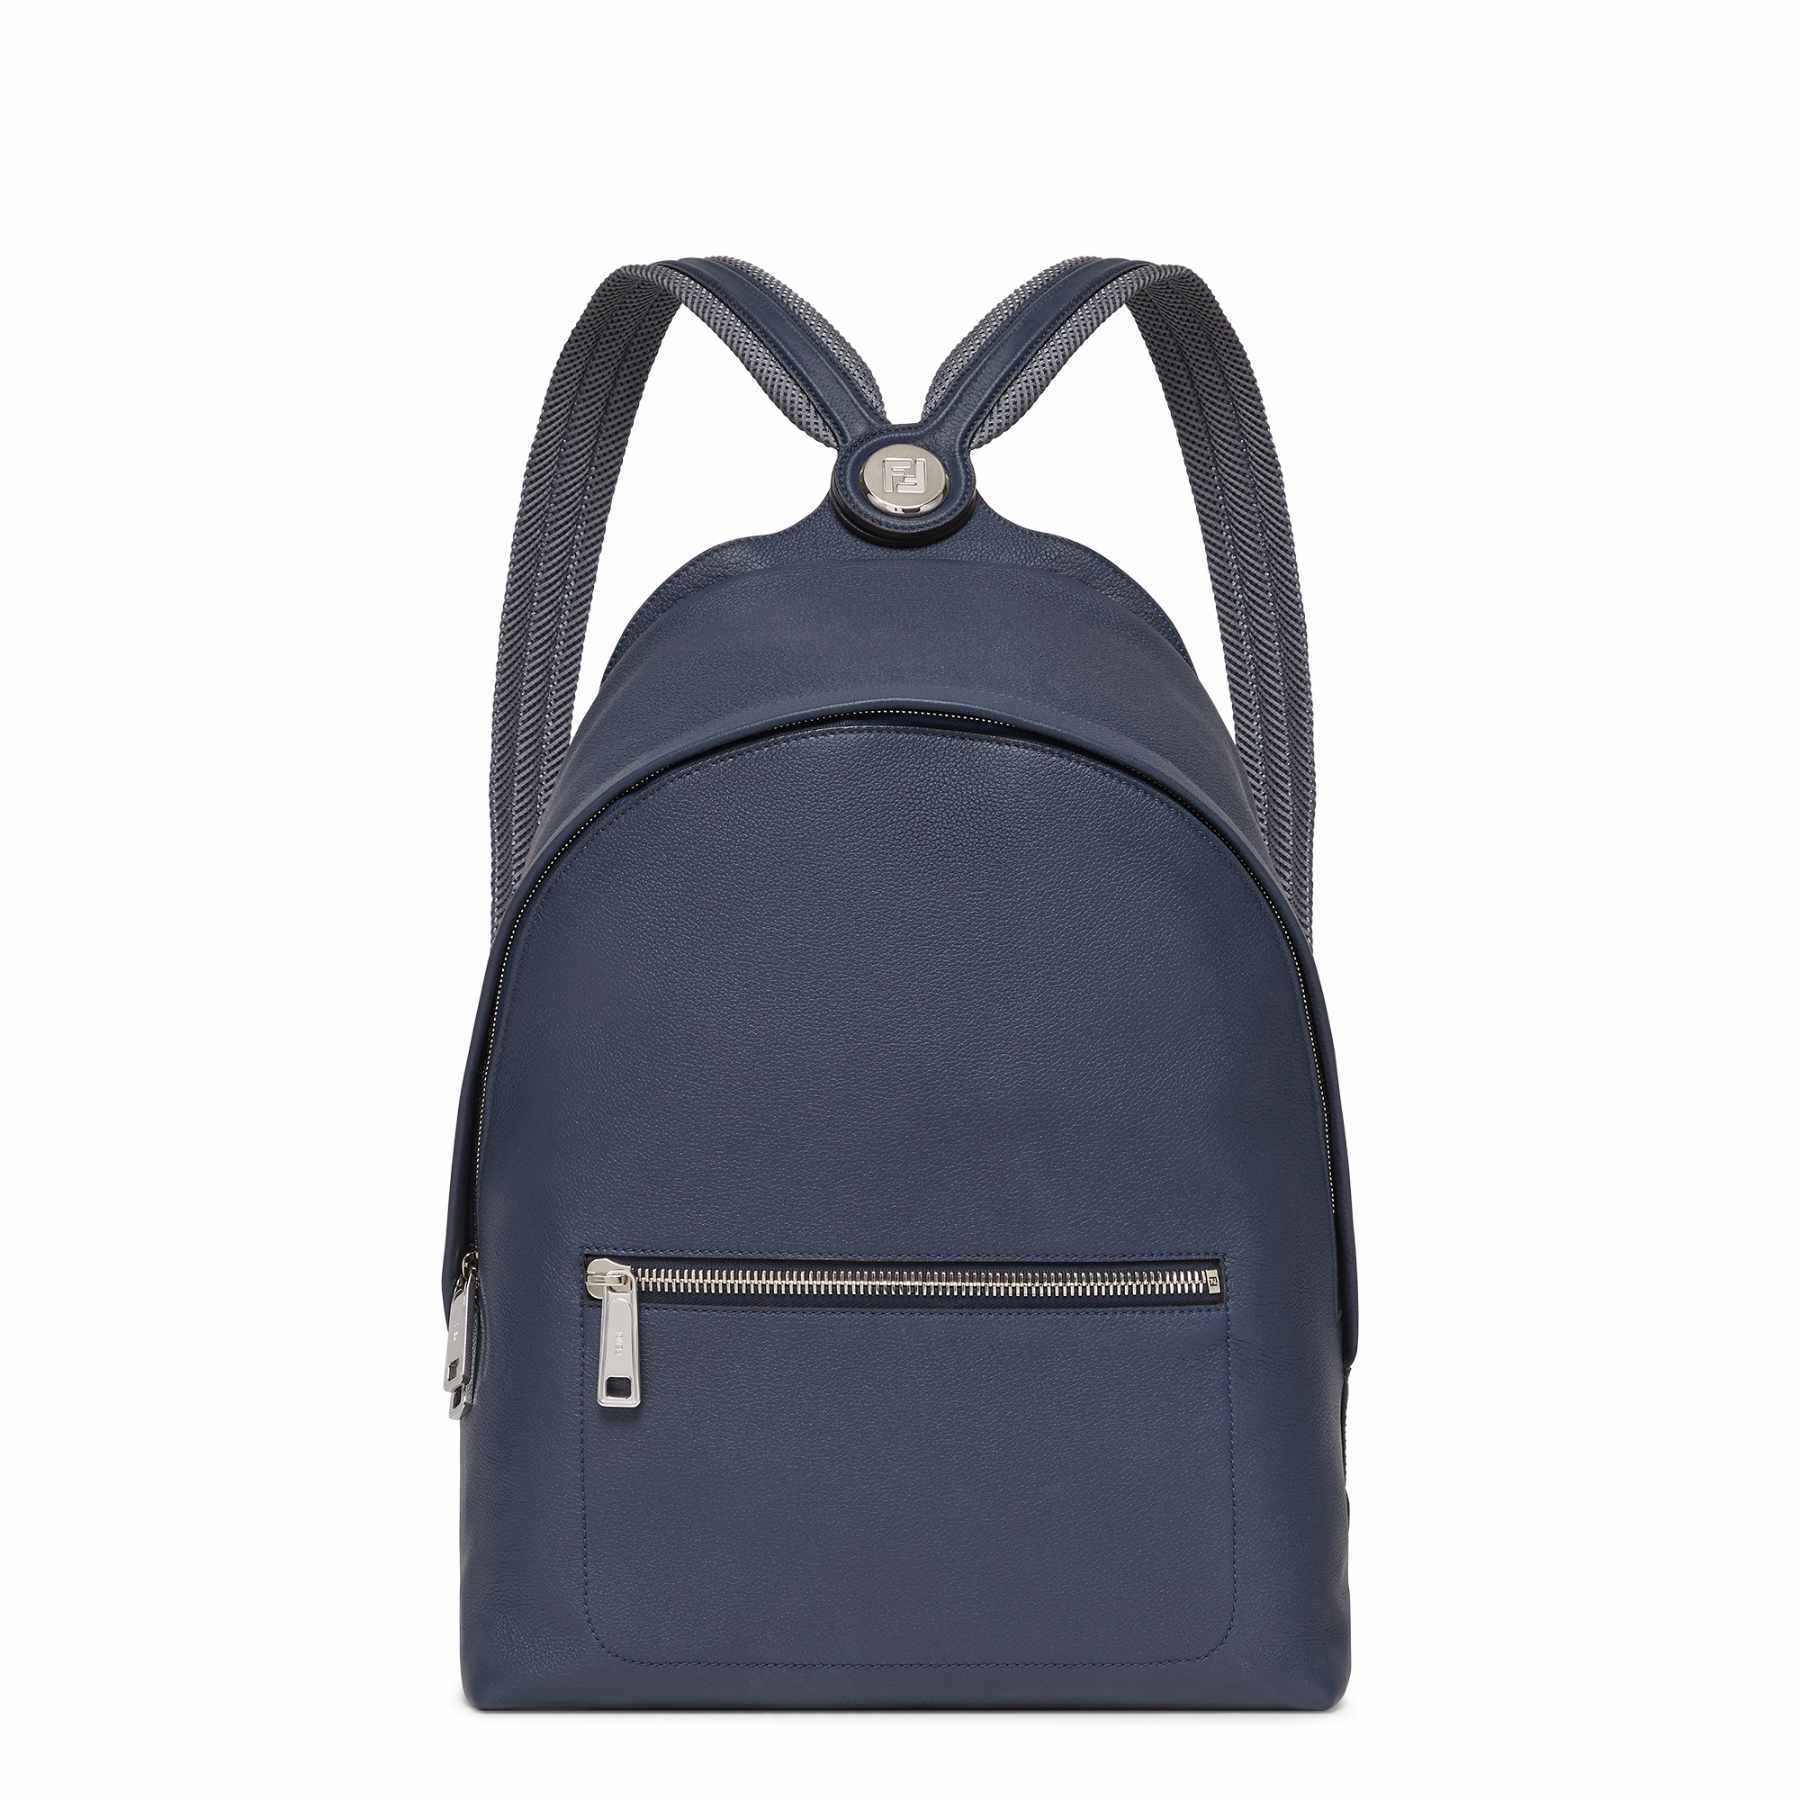 A product photo of Fendi's Chiodo Backpack in navy grain leather